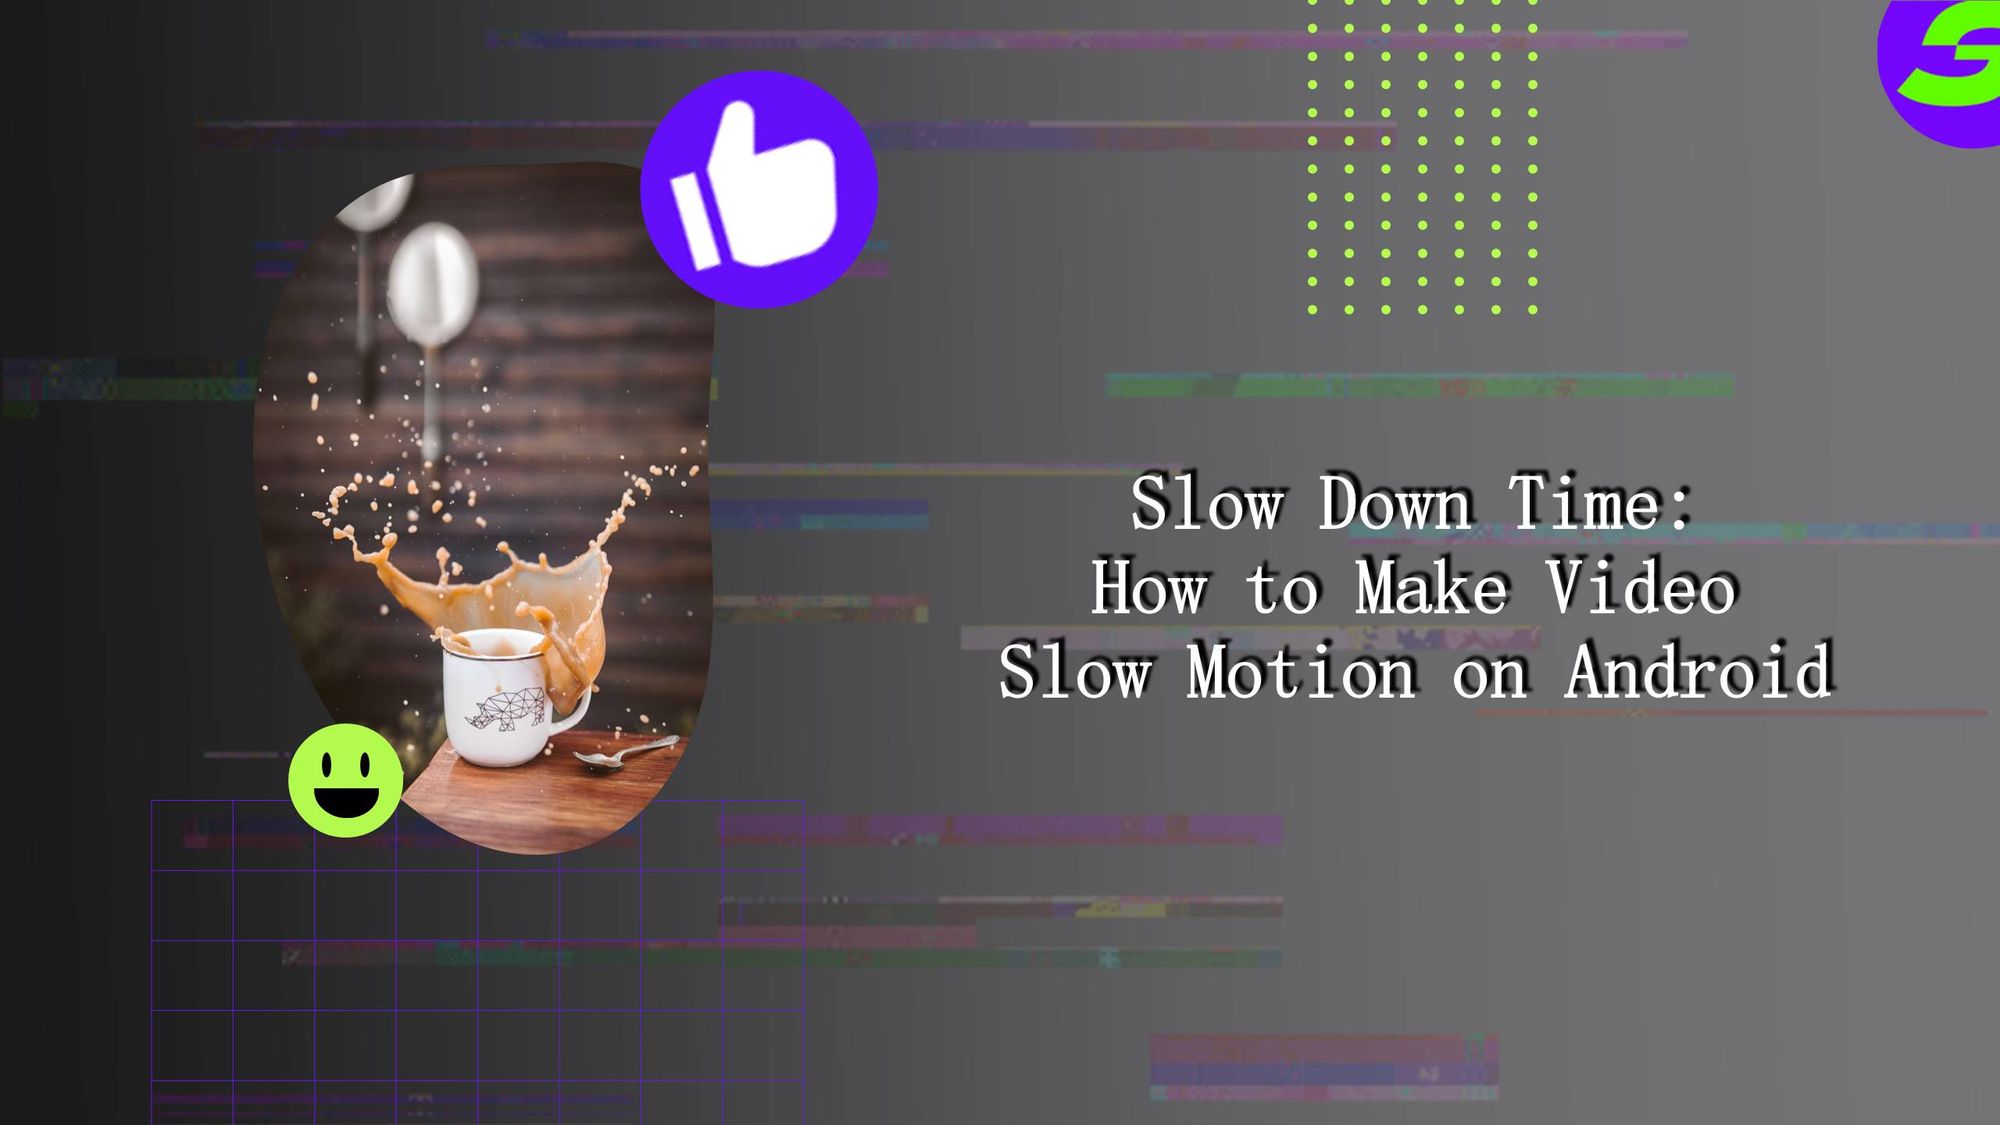 Step-by-Step Guide: How to Make Video Slow Motion on Android Device